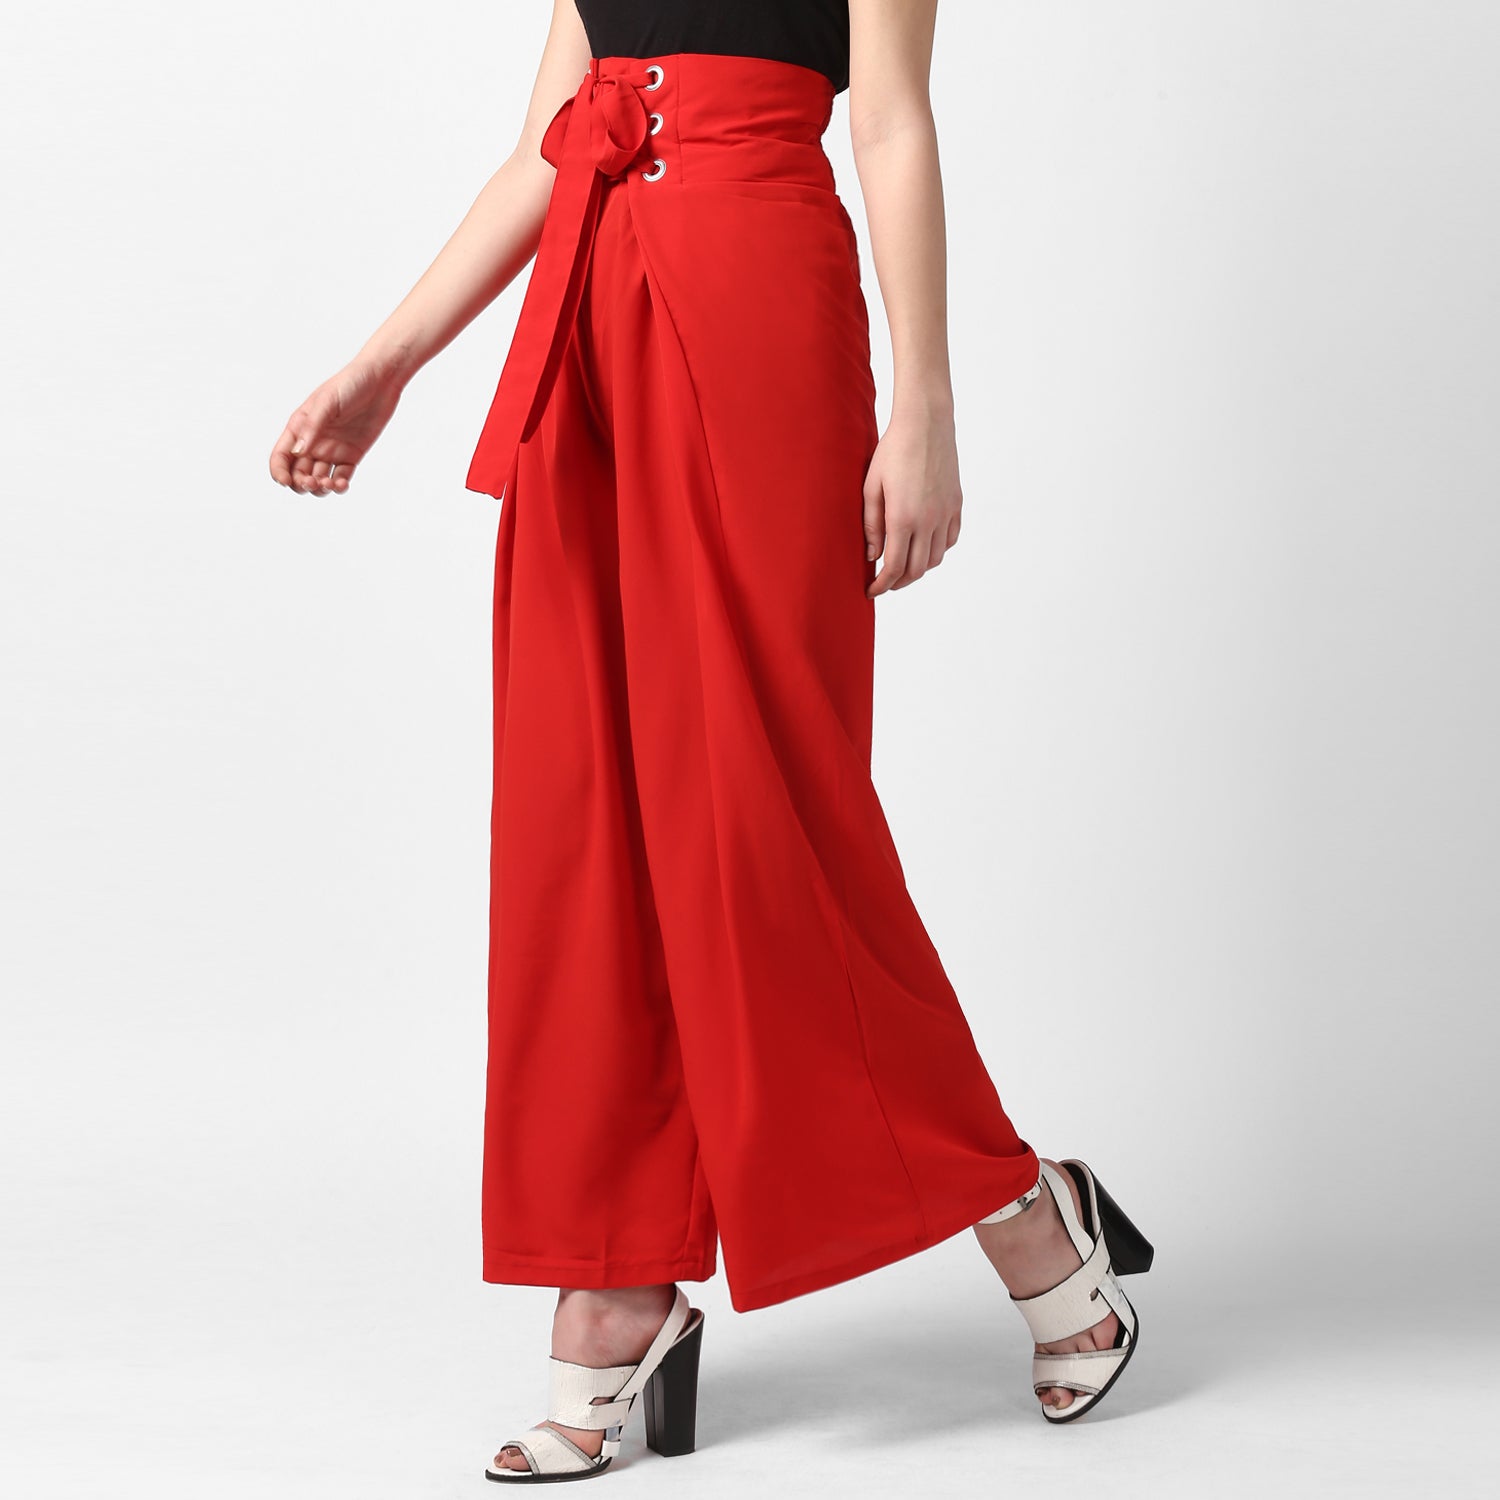 Women's Red Polyester High Waisted Palazzo with front Rivets and Back Elastic - StyleStone